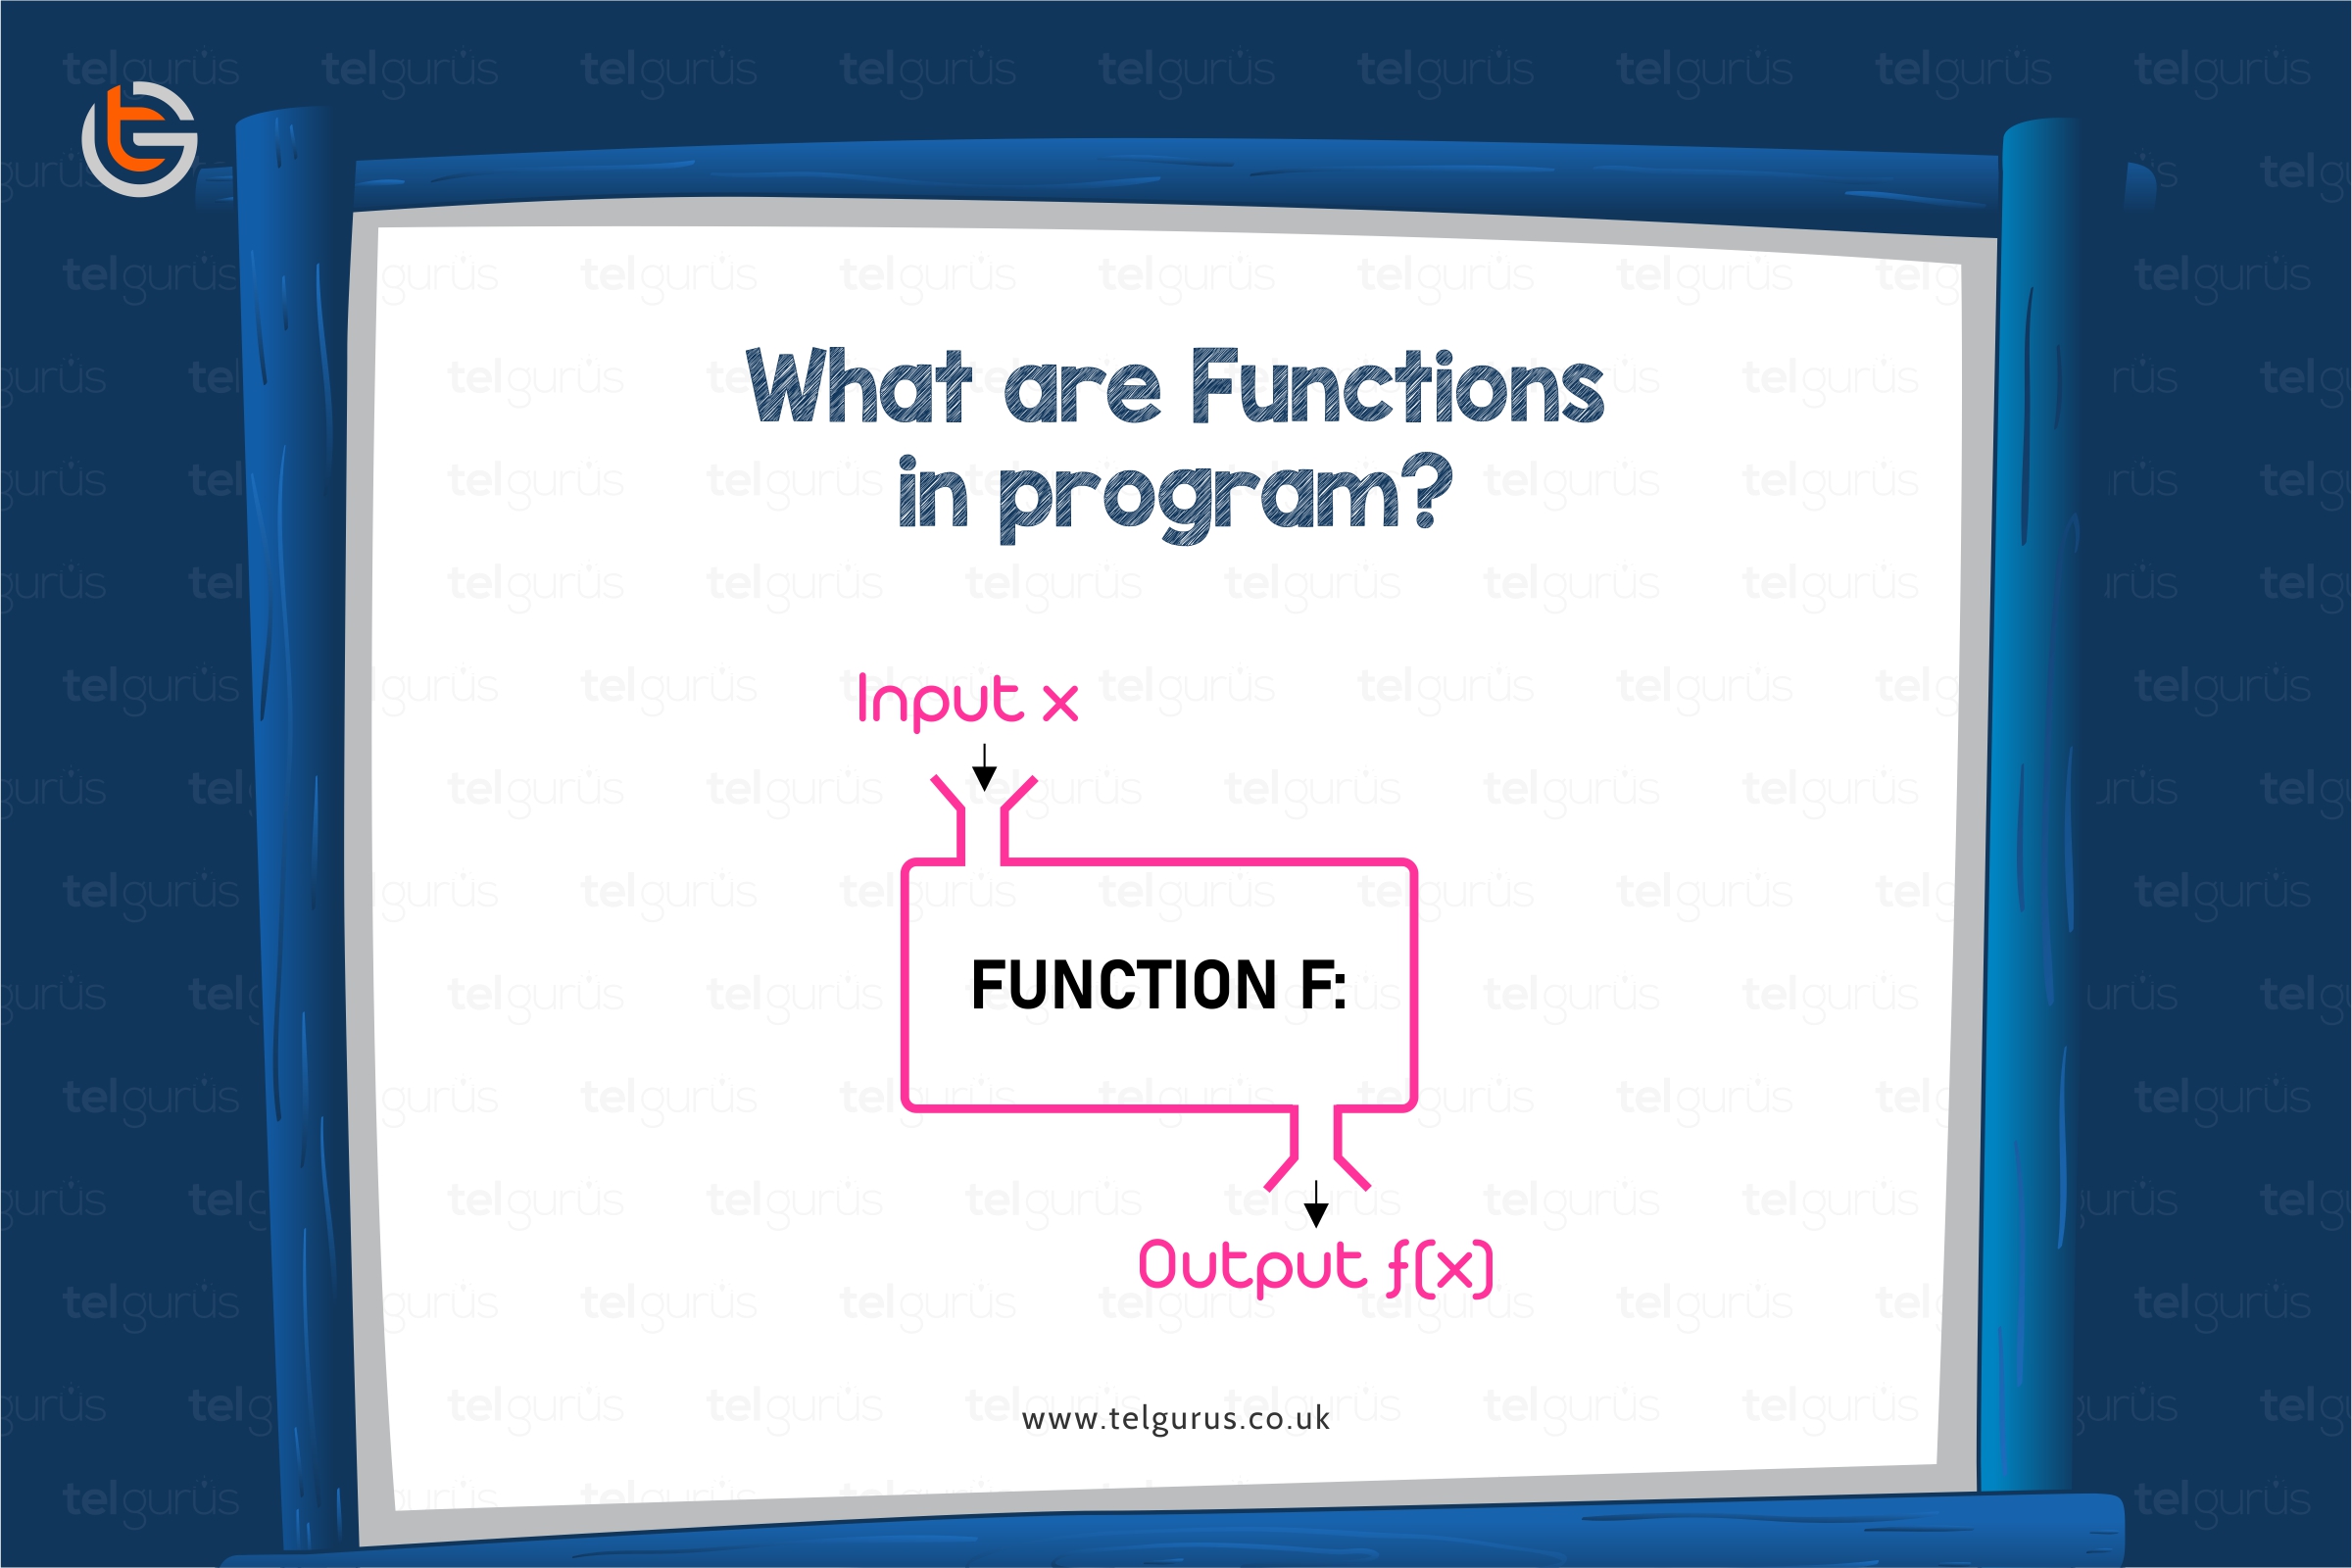 What are Functions in program?